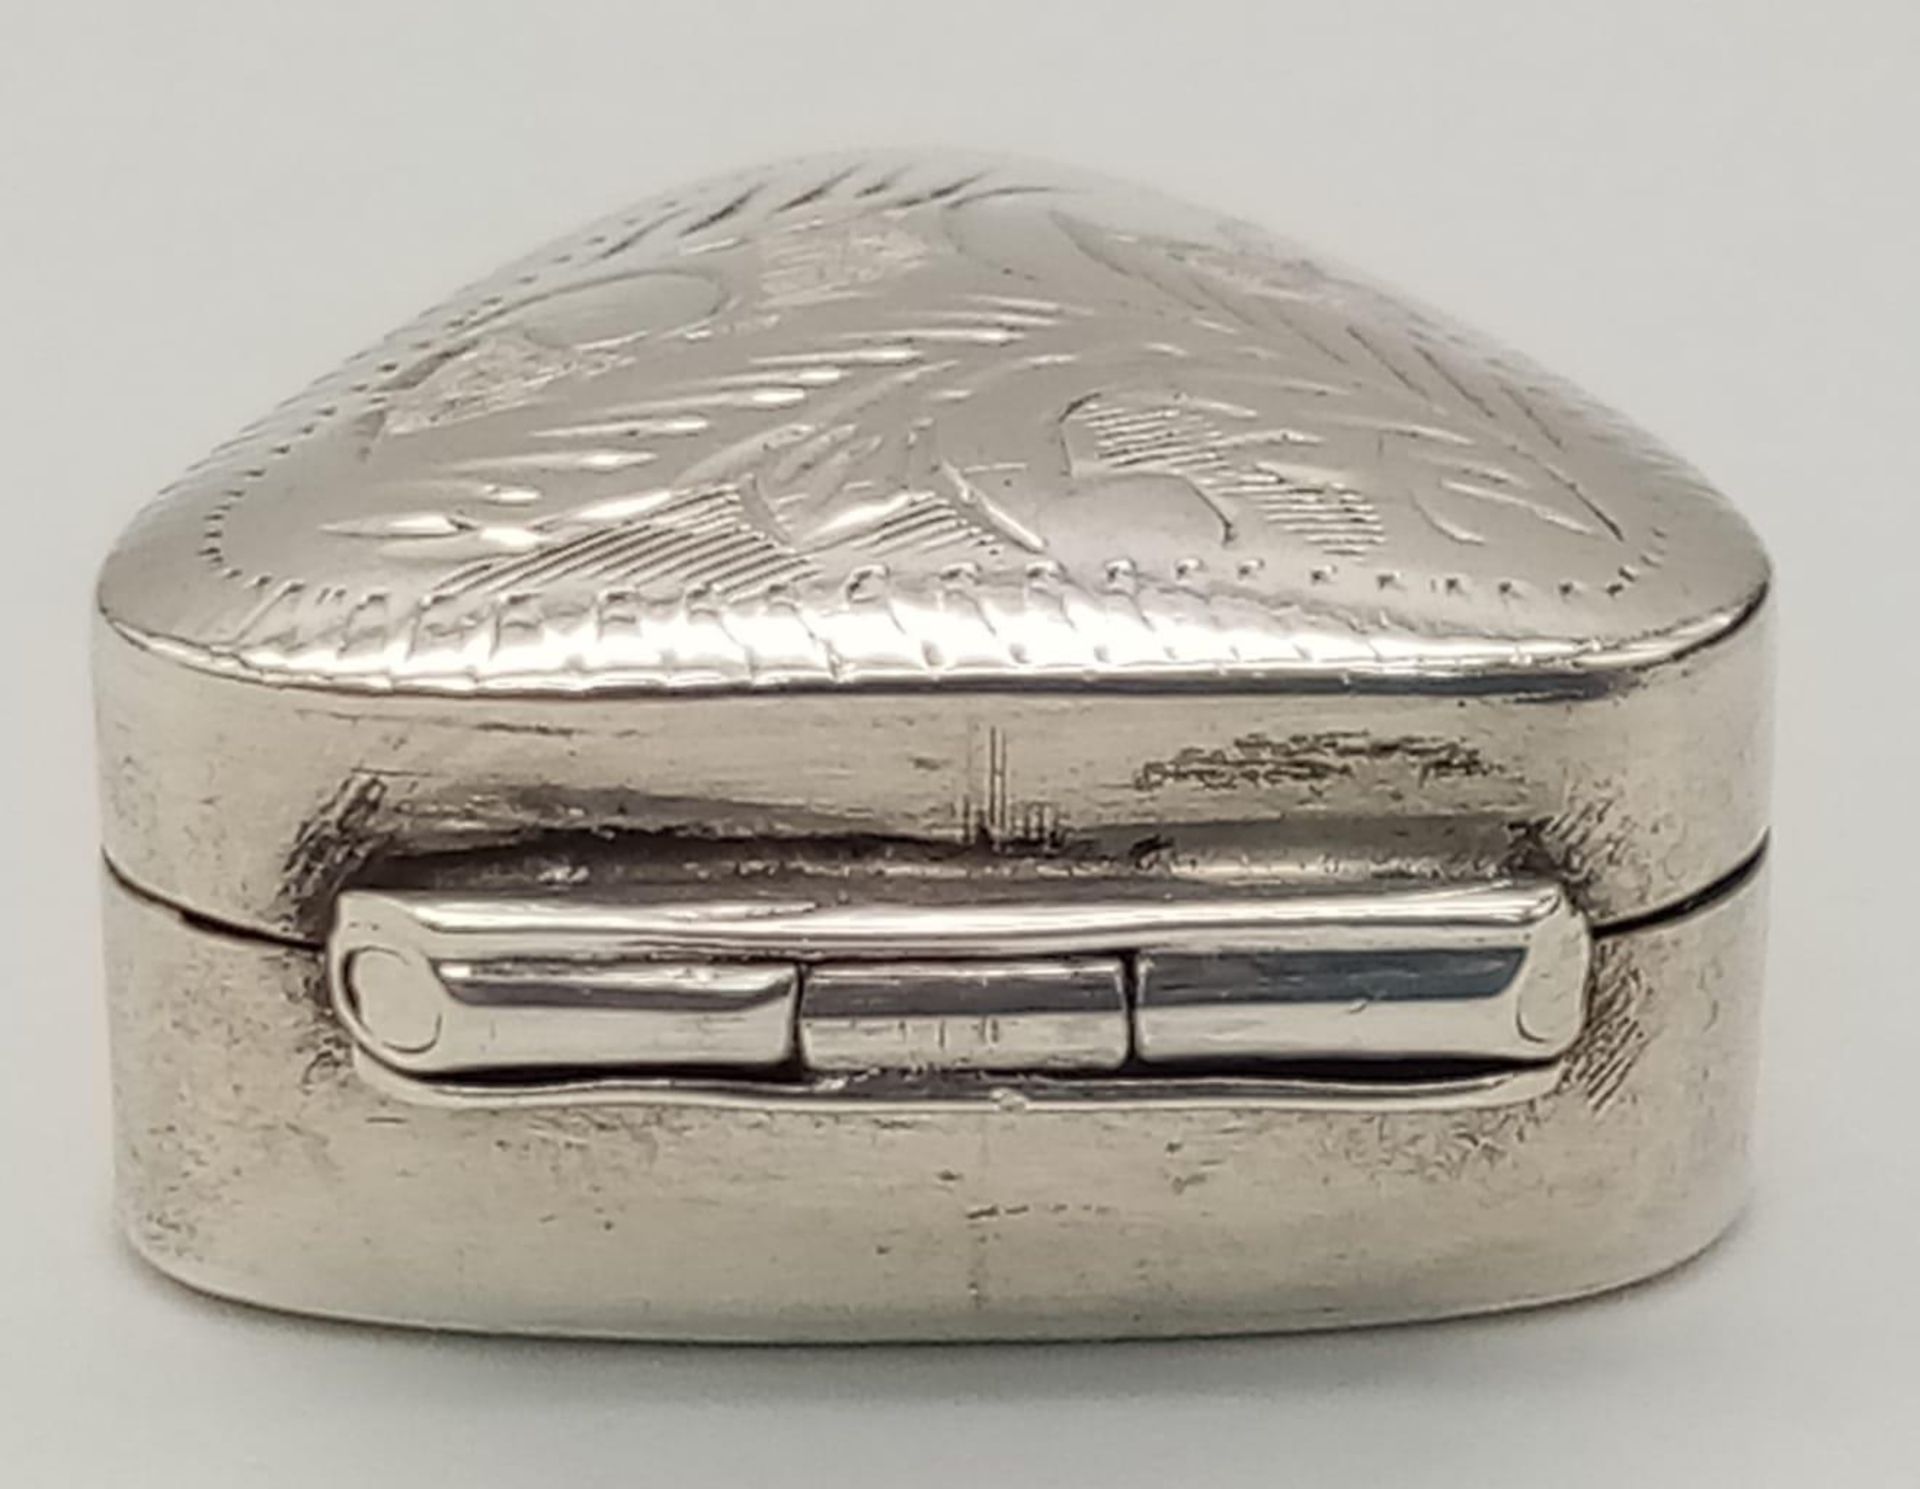 A TRIANGULAR STERLING SILVER TRINKLET BOX/PILL BOX, NICELY ENGRAVED ON TOP, WEIGHT 7.1G - Image 5 of 11